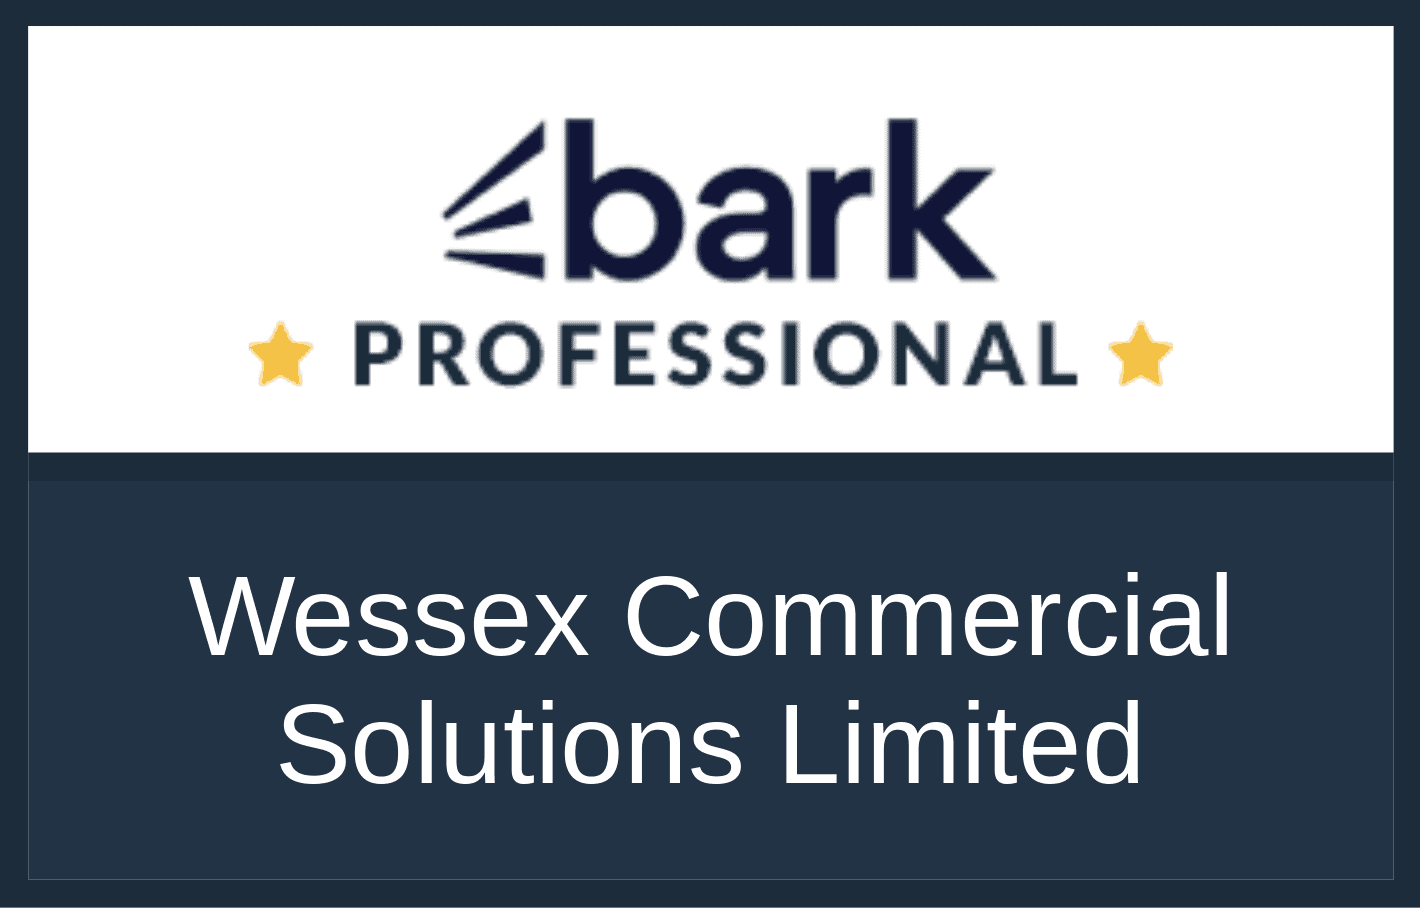 Bark Professional Wessex Commercial Solutions Limited